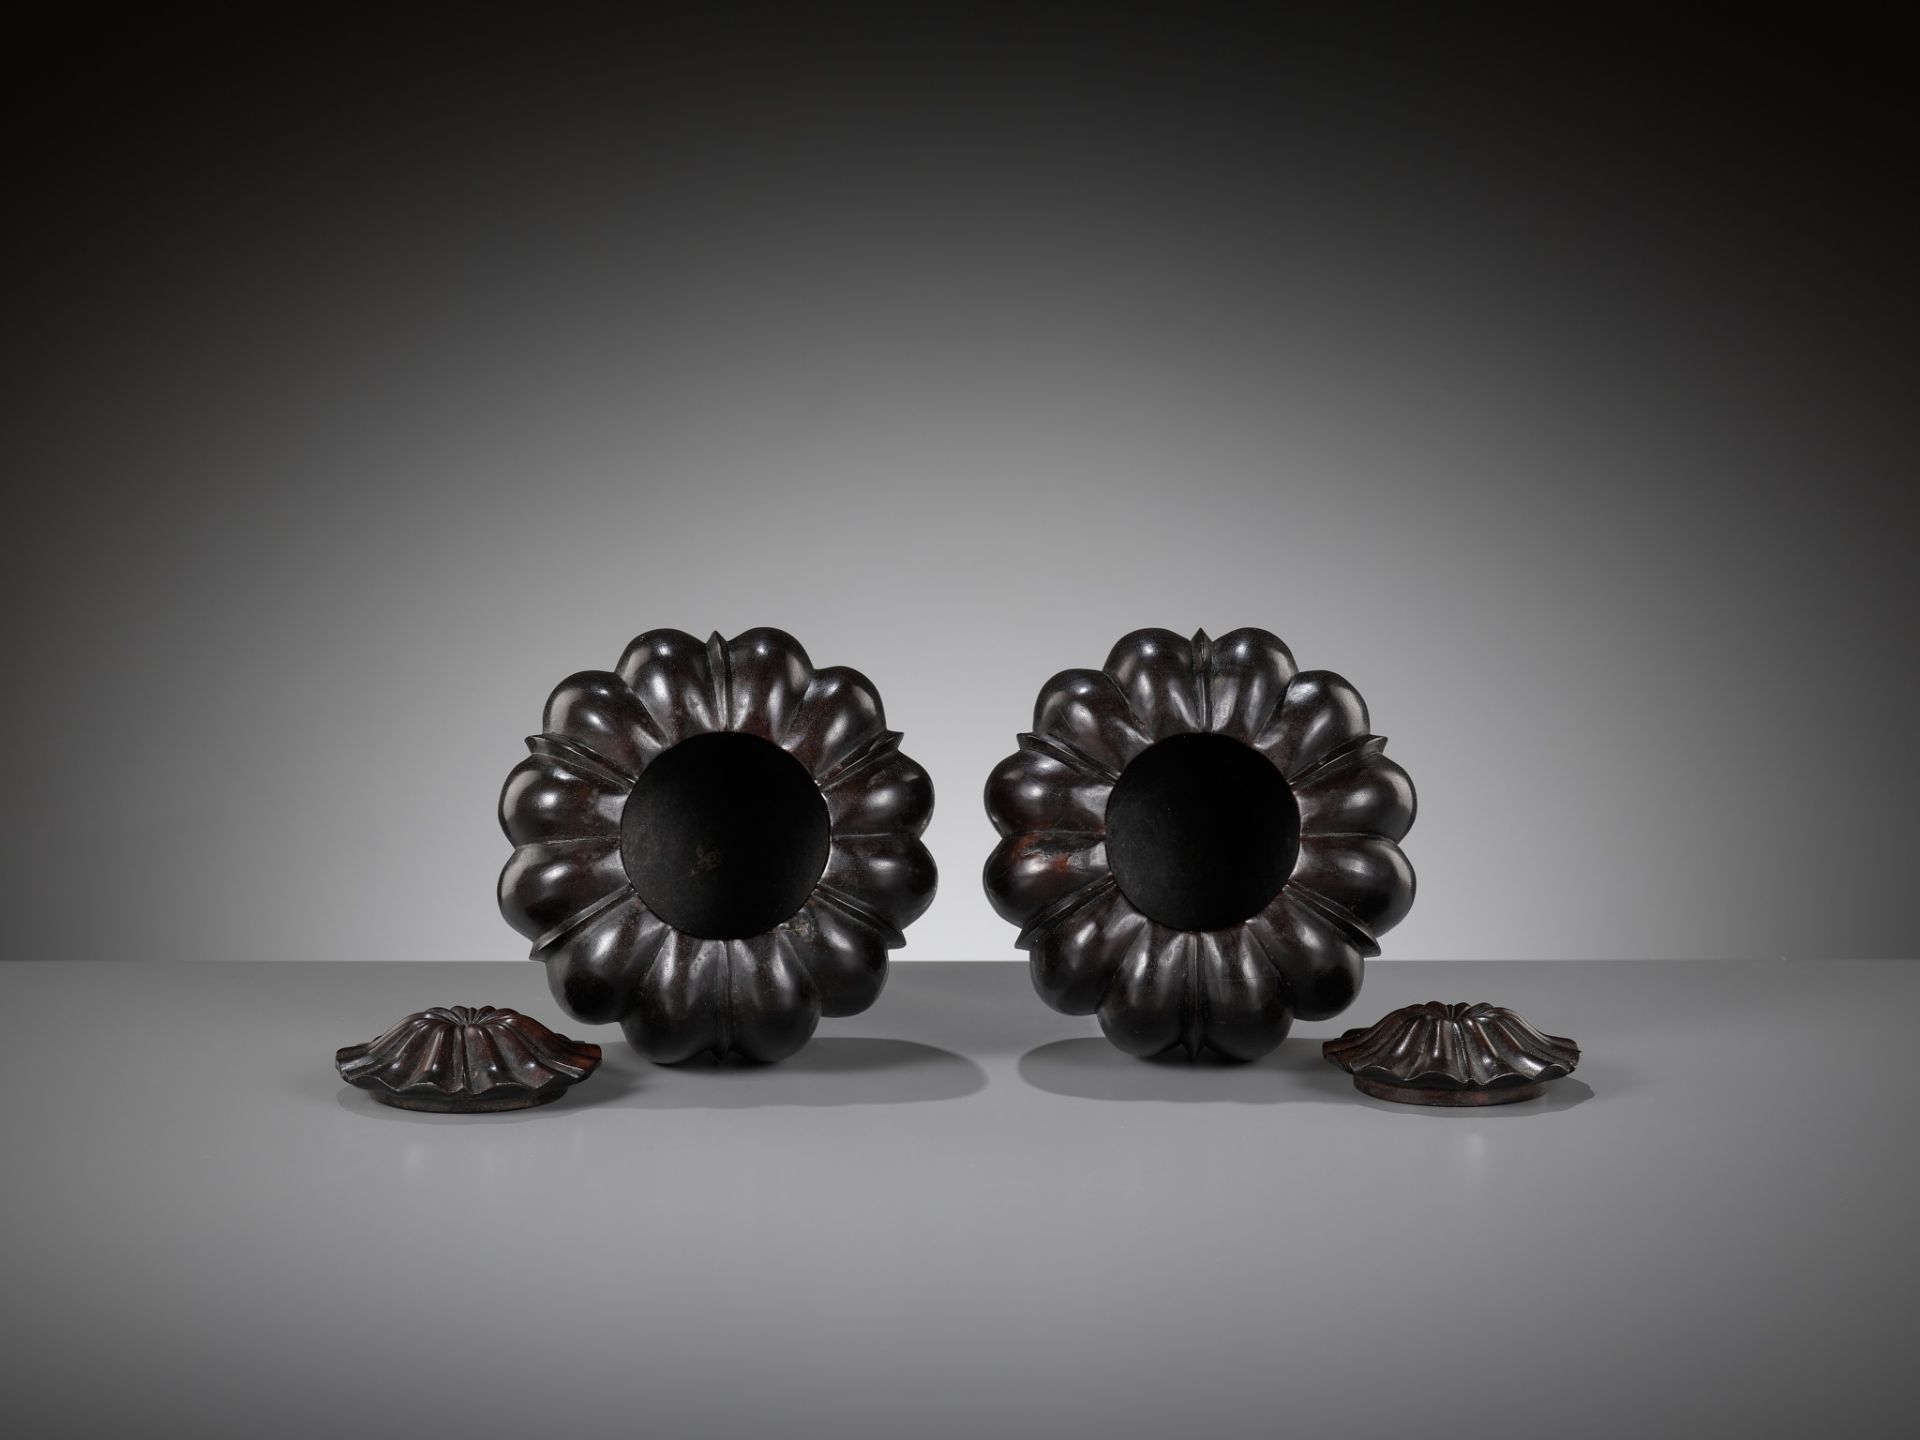 A PAIR OF ZITAN WEIQI COUNTER CONTAINERS, WEIQIZIHE, 17TH-18TH CENTURY - Image 8 of 10